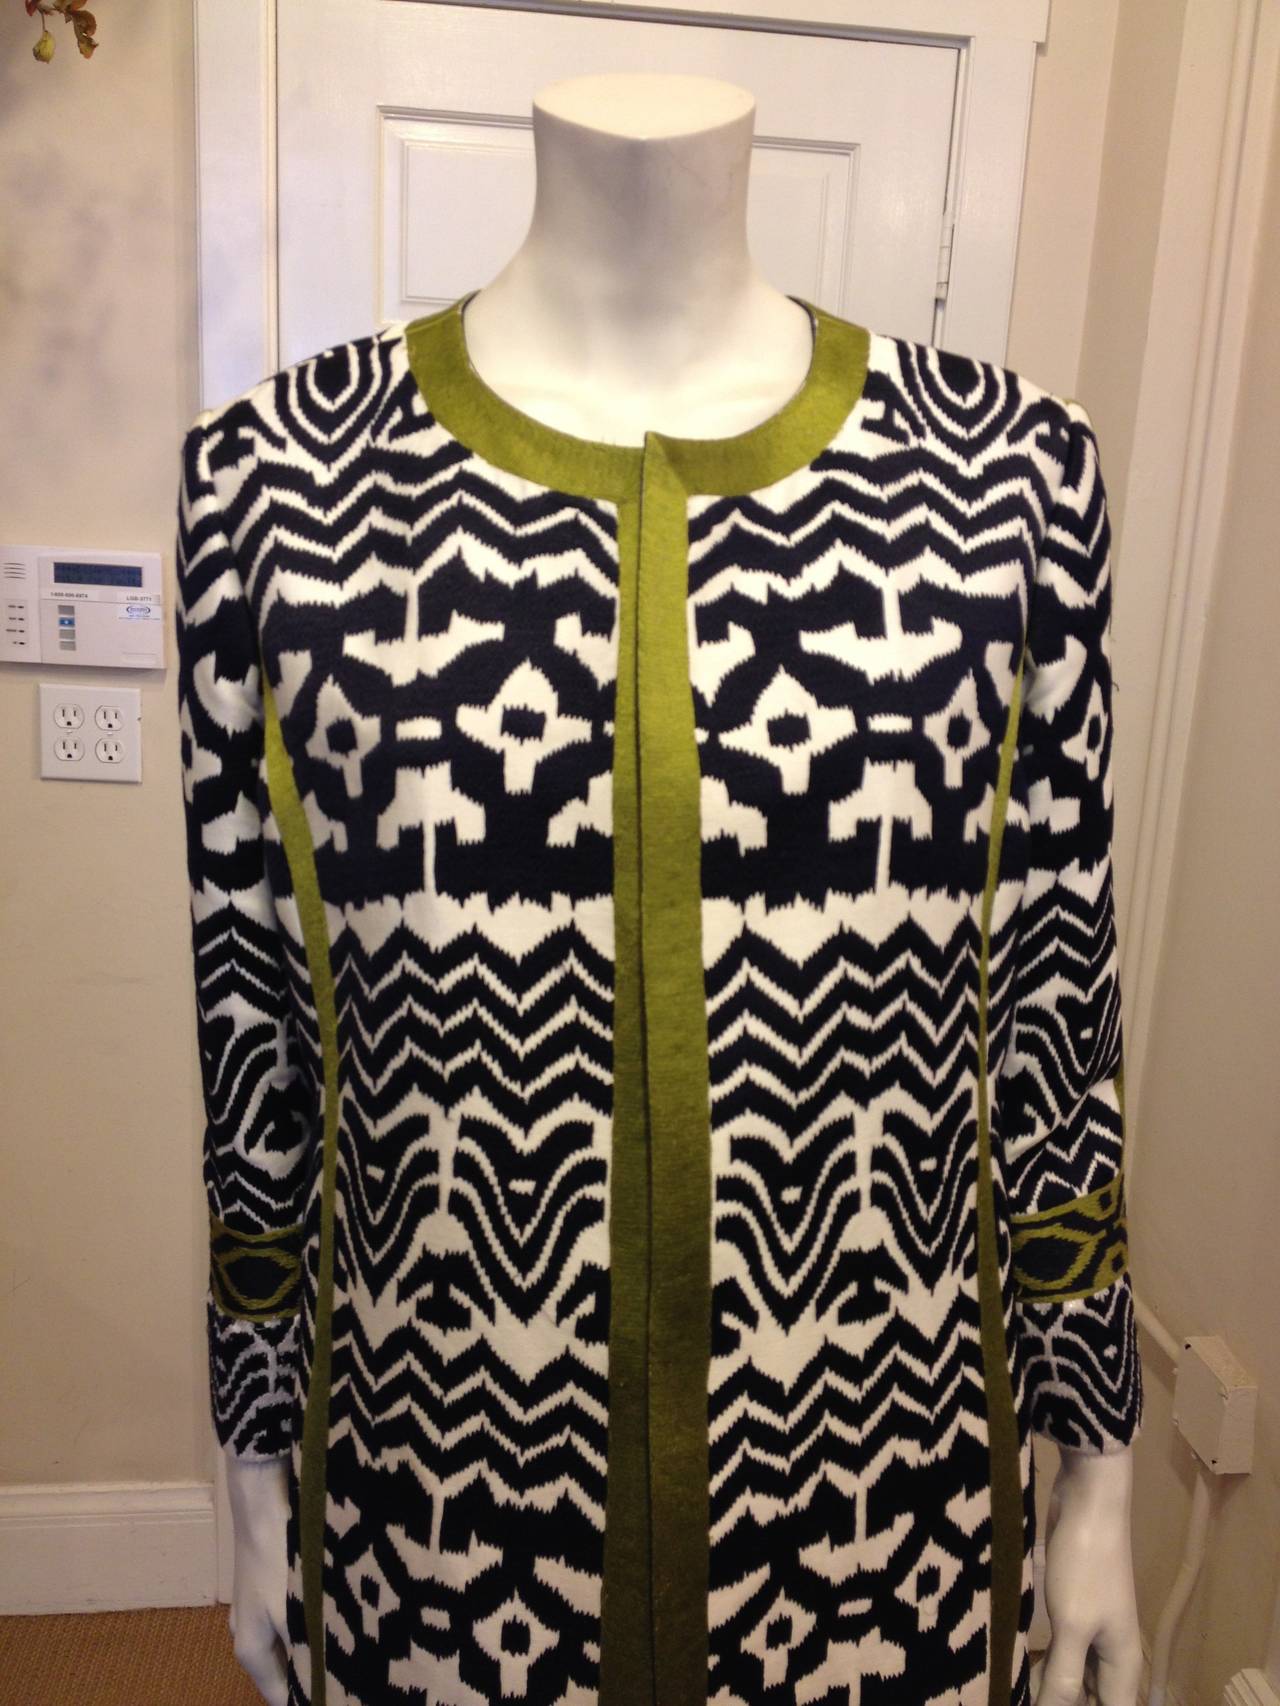 This coat is an amazing piece of art! Soft cream is heavily embroidered with thick navy ikat-style stripes, while bright pea green embroidered stripes accent the high-contrast body. Additionally, each cuff and the hem features rows of white sequins